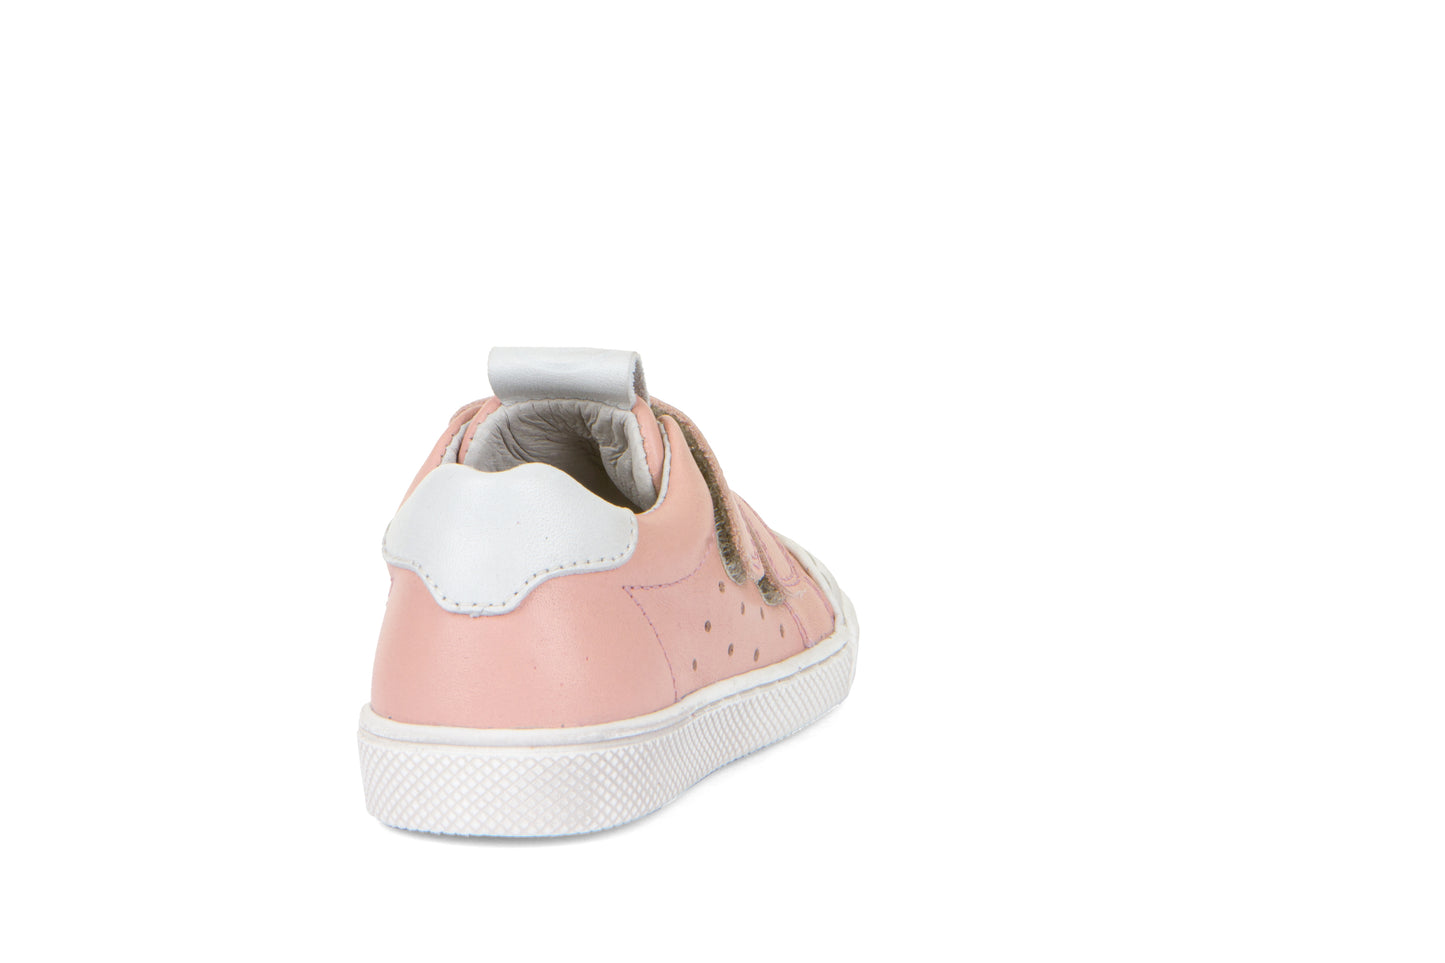 A girls casual shoe by Froddo, style G2130290-4 Rosario, in pink with white trim, velcro fastening. Back view.